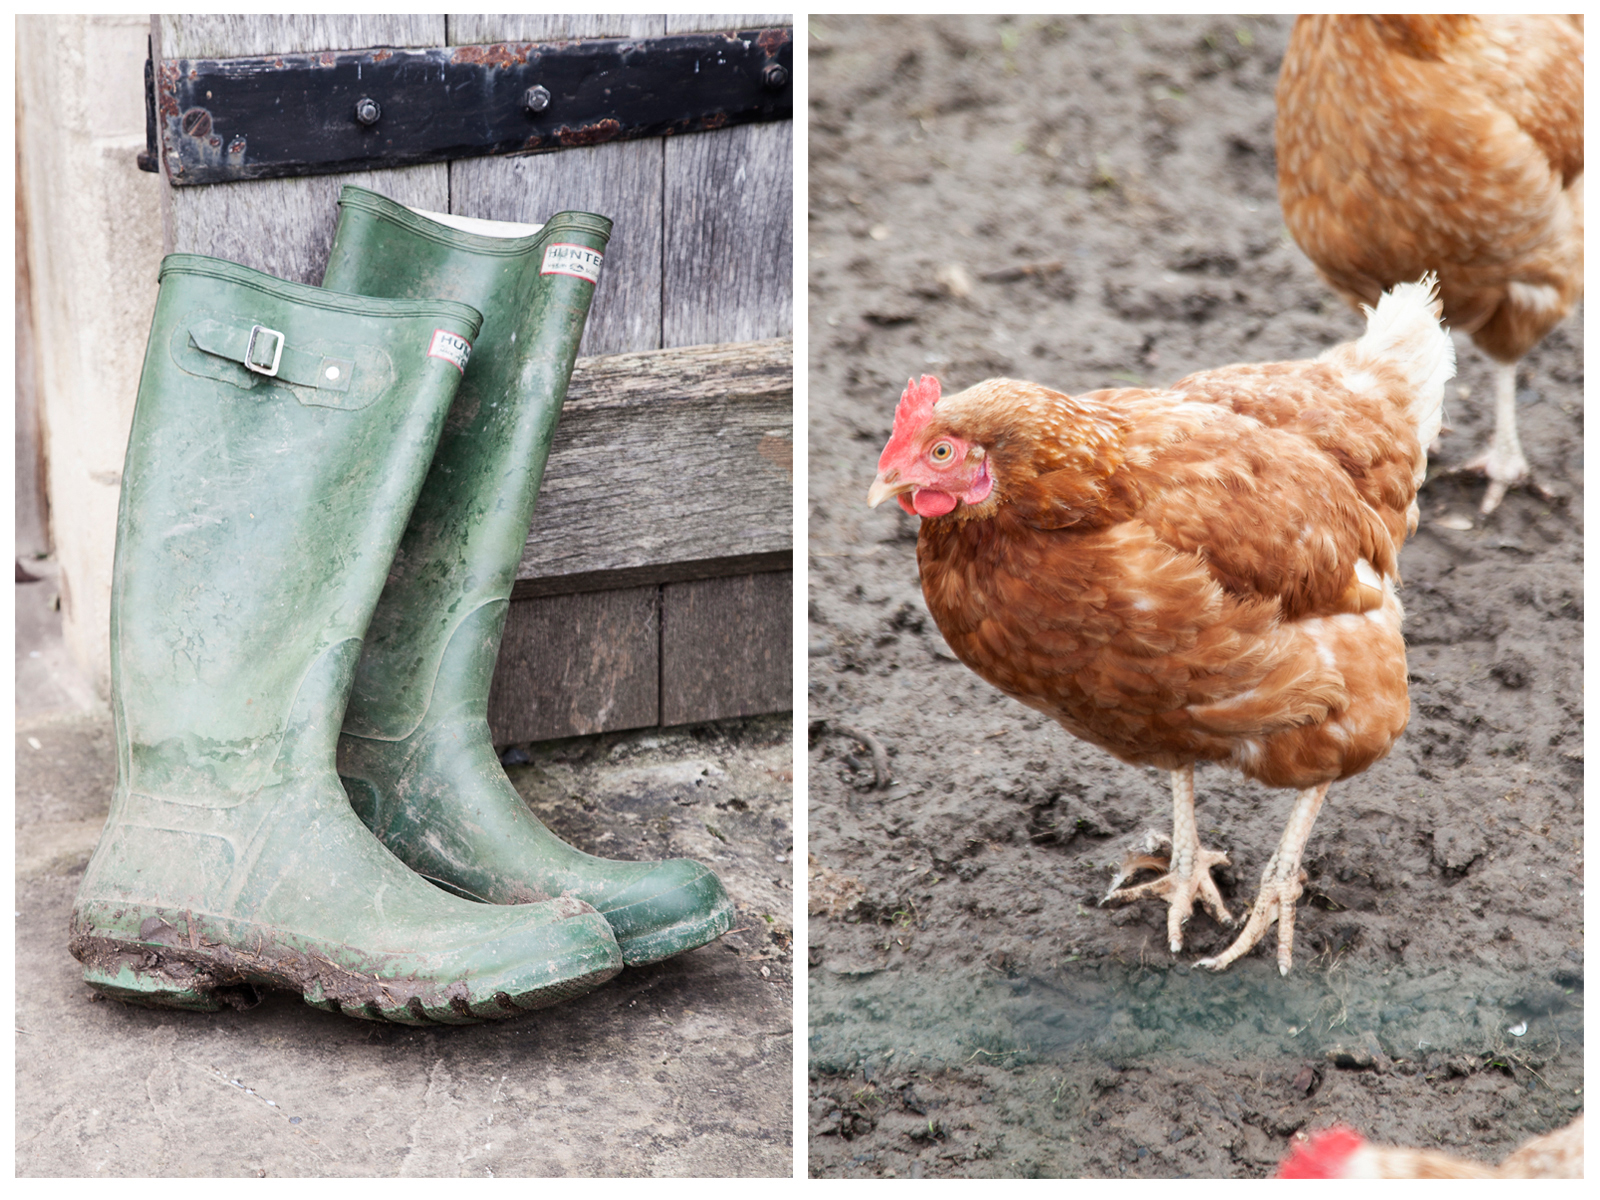 Yes, that's actual mud, and those are real, tasty chickens/Photo:Susie Lowe